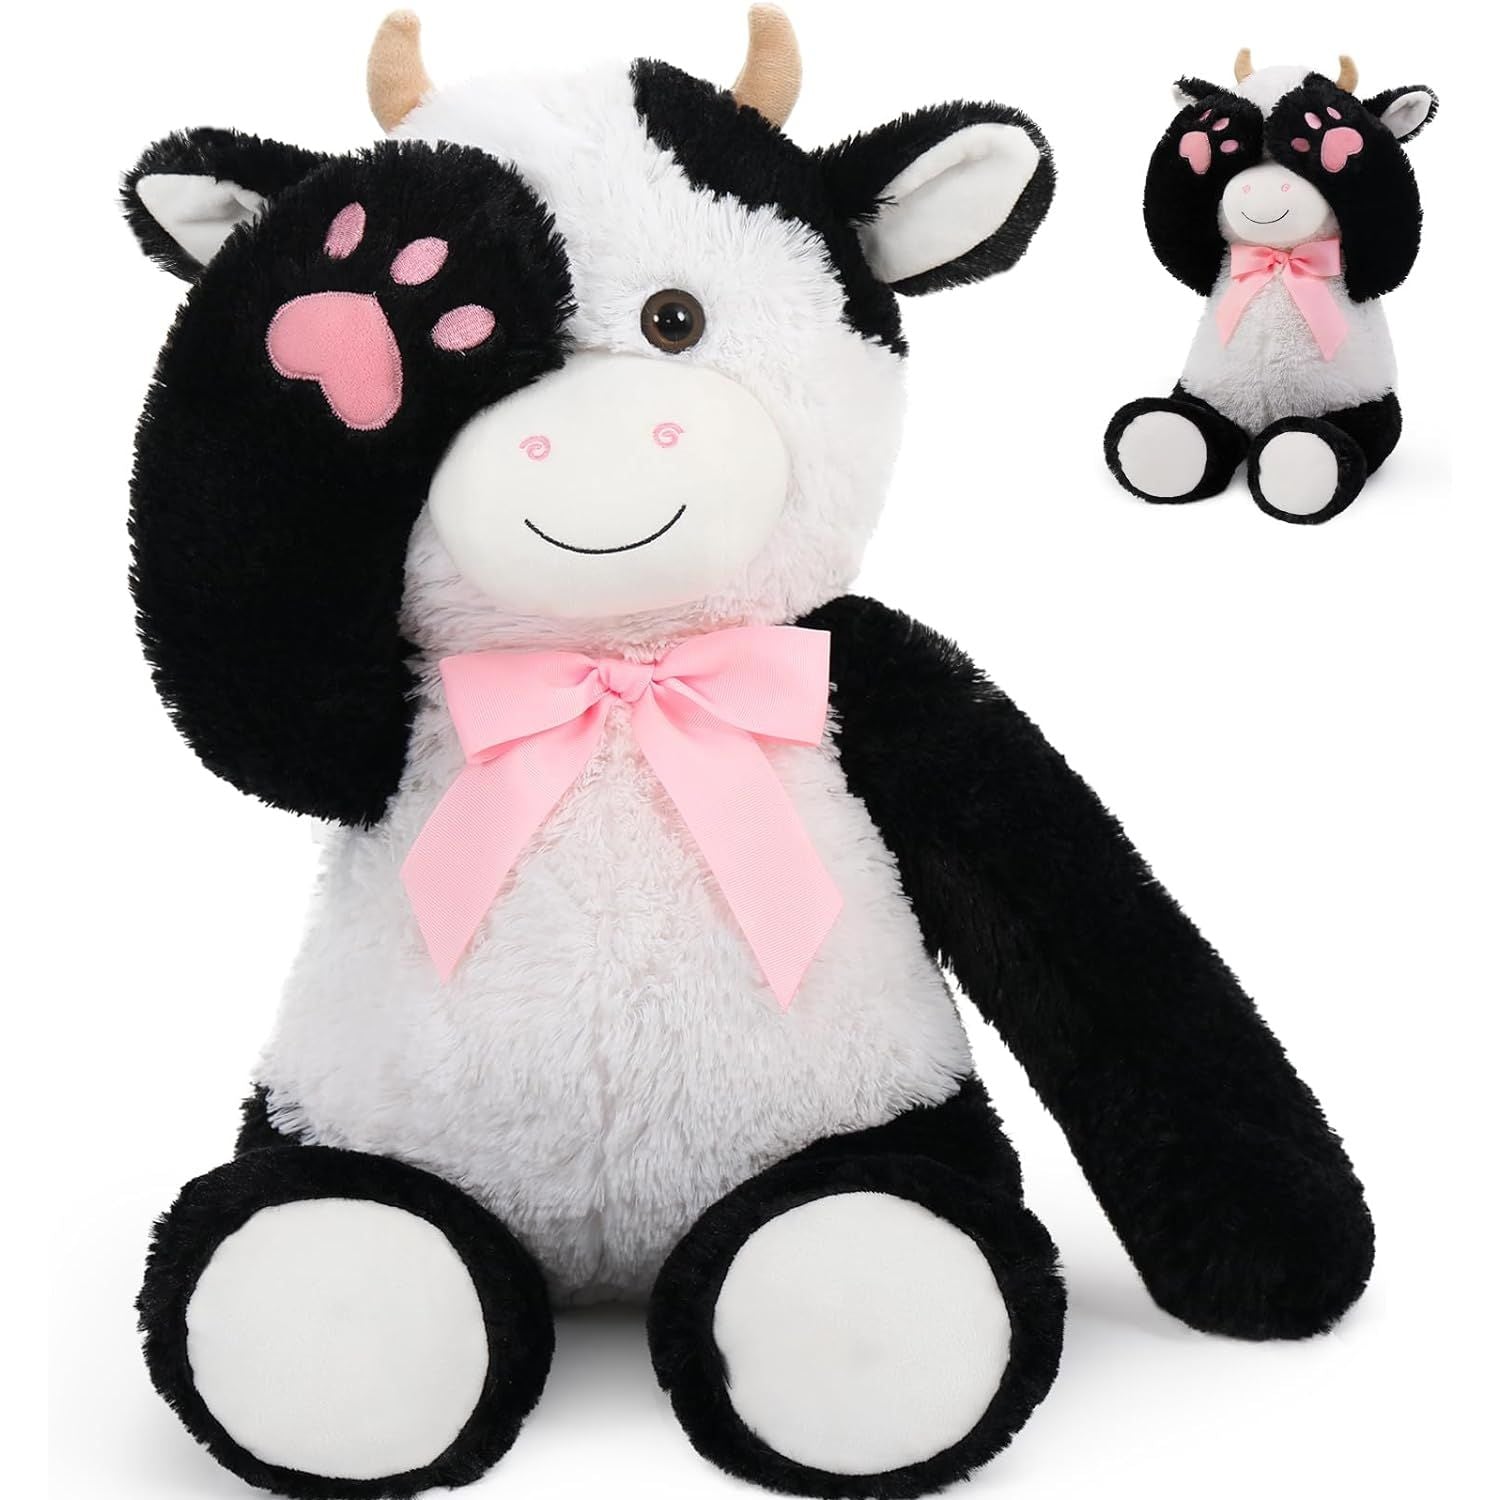 Dairy Cow/Fox Plush Toy, 24 Inches